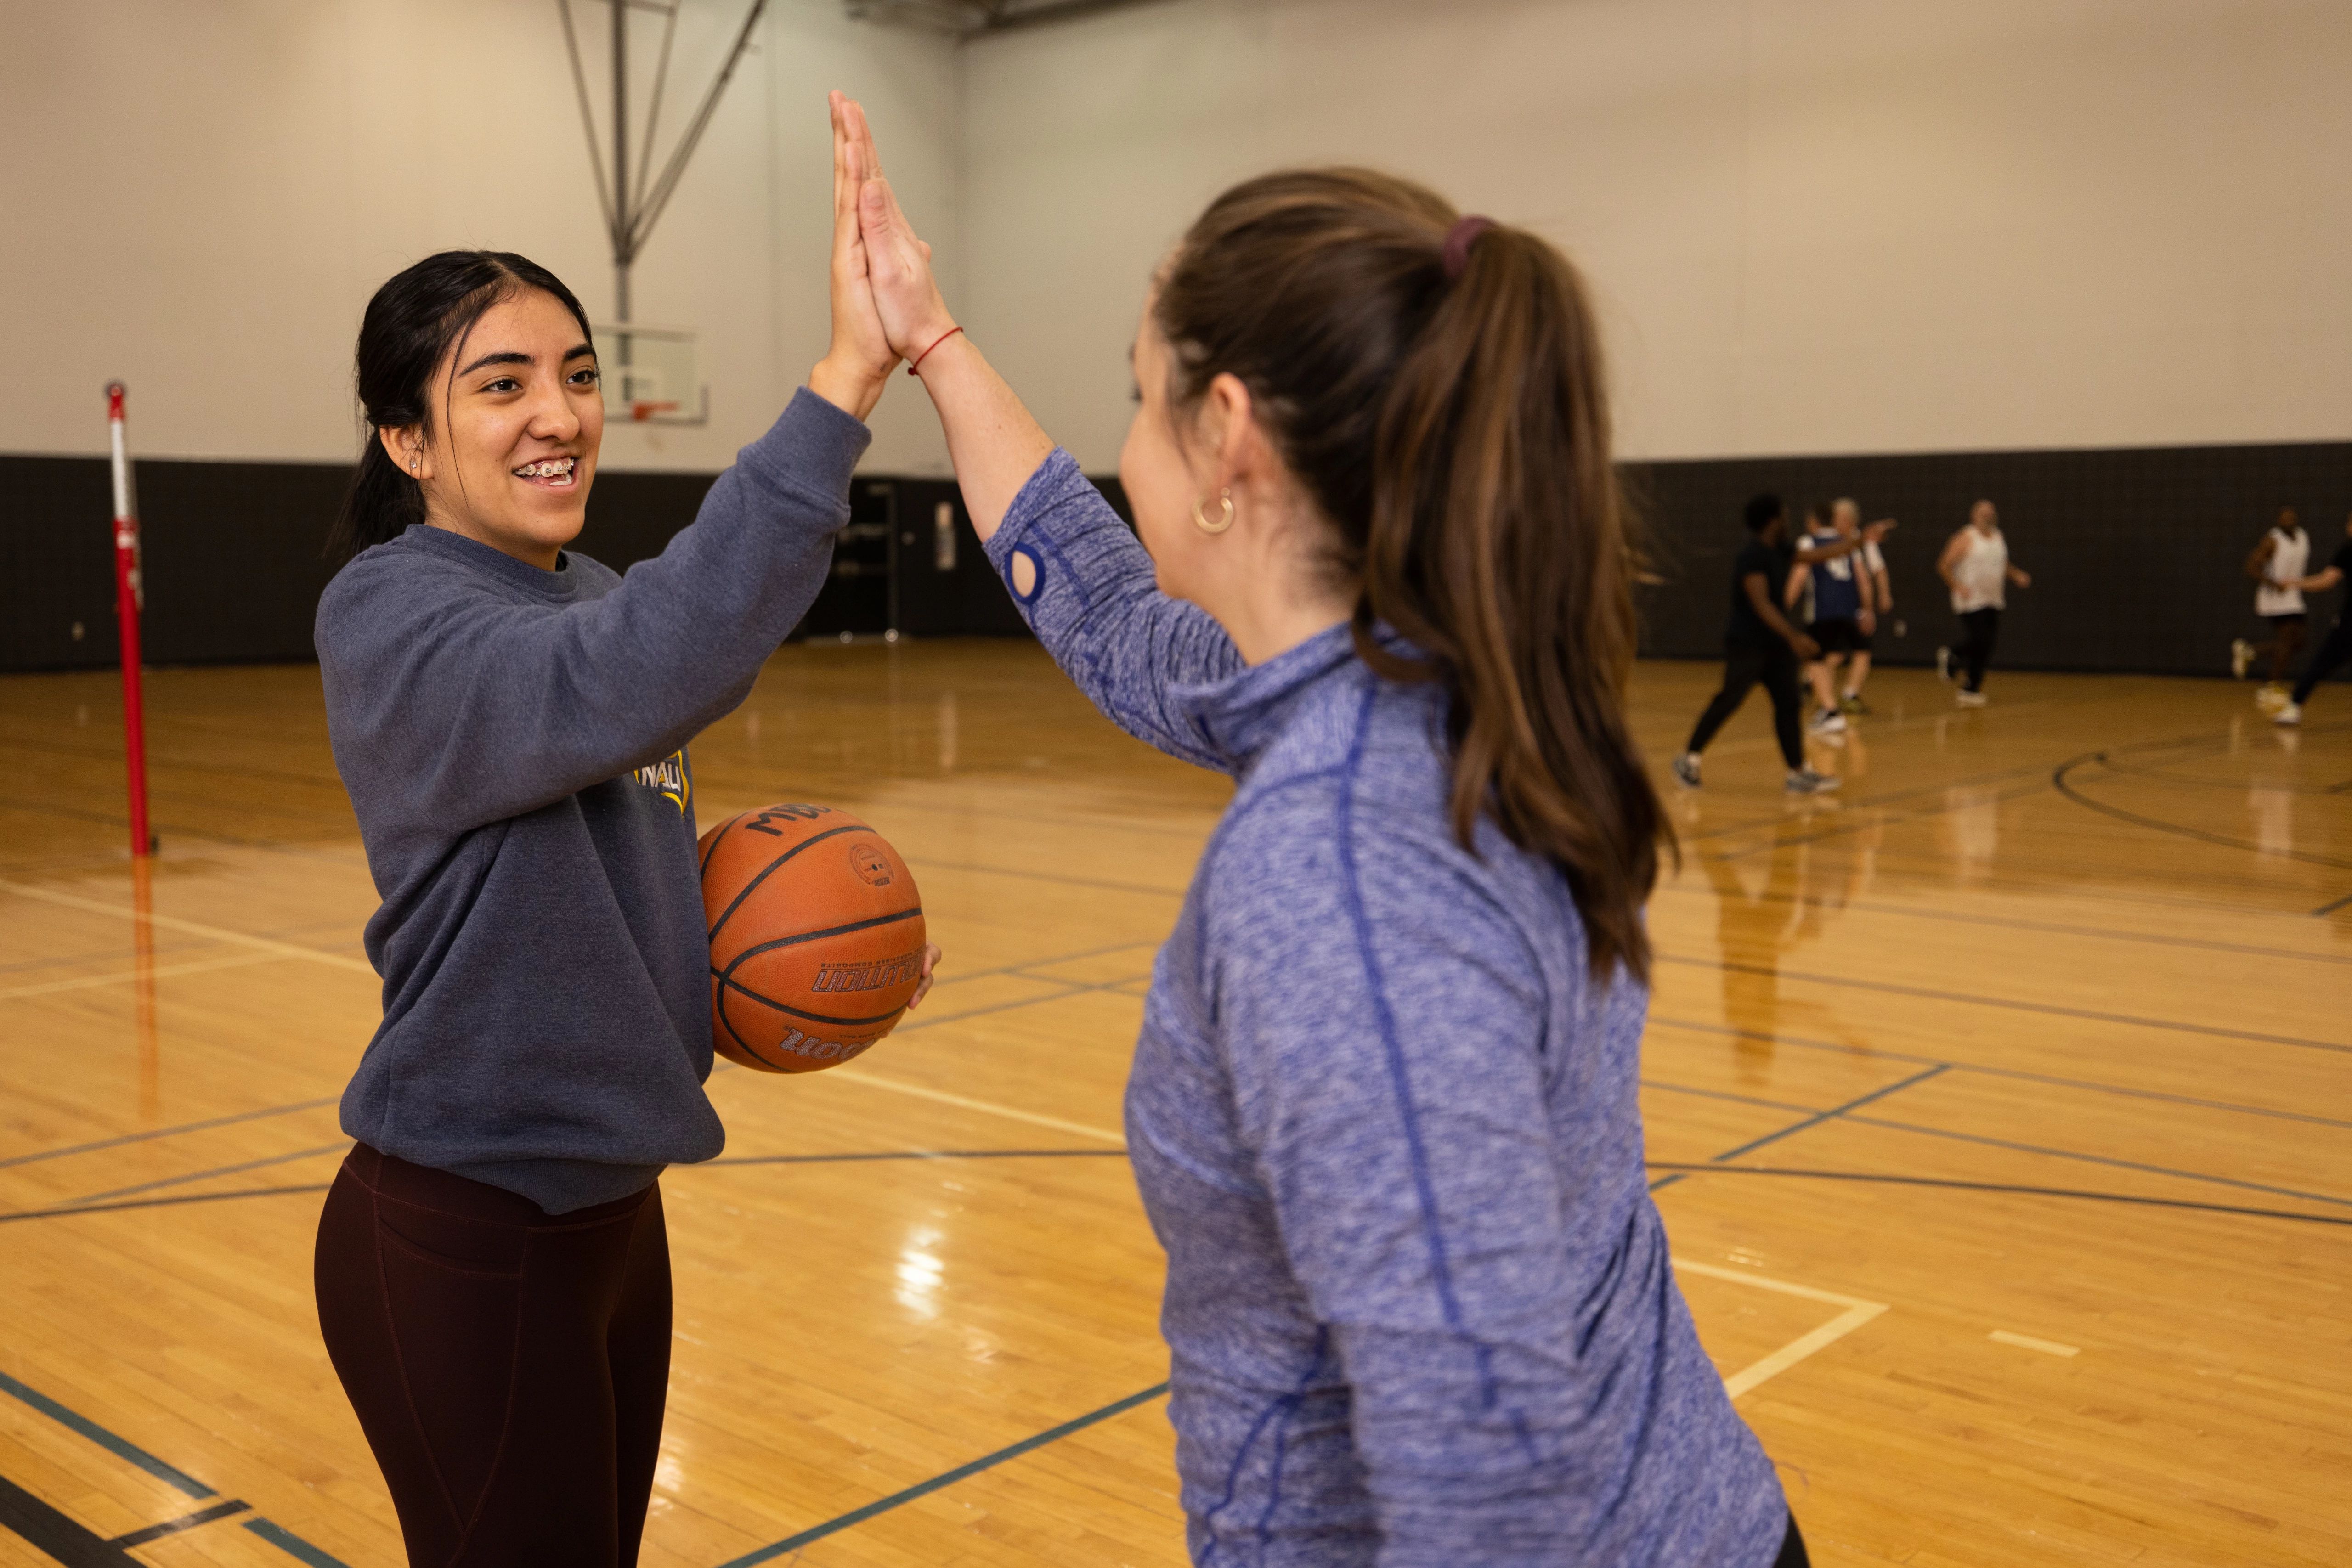 Two students high-fiving at the basketball court.